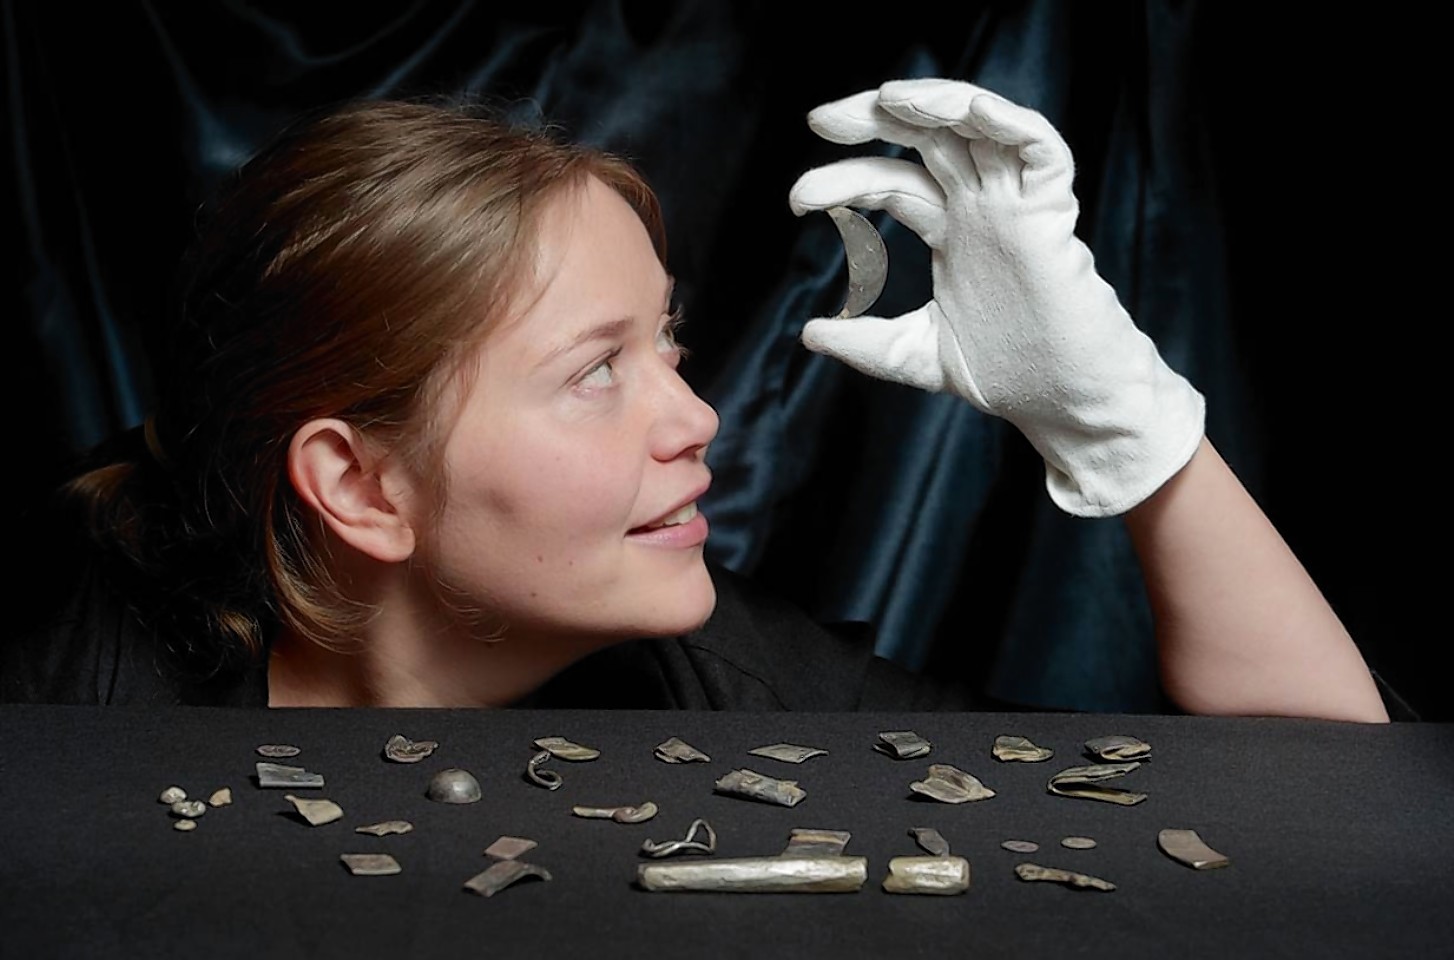 Archaeologists from National Museums Scotland and the University of Aberdeen’s Northern Picts project have unearthed a hoard of Late Roman and Pictish silver buried in a field in Aberdeenshire